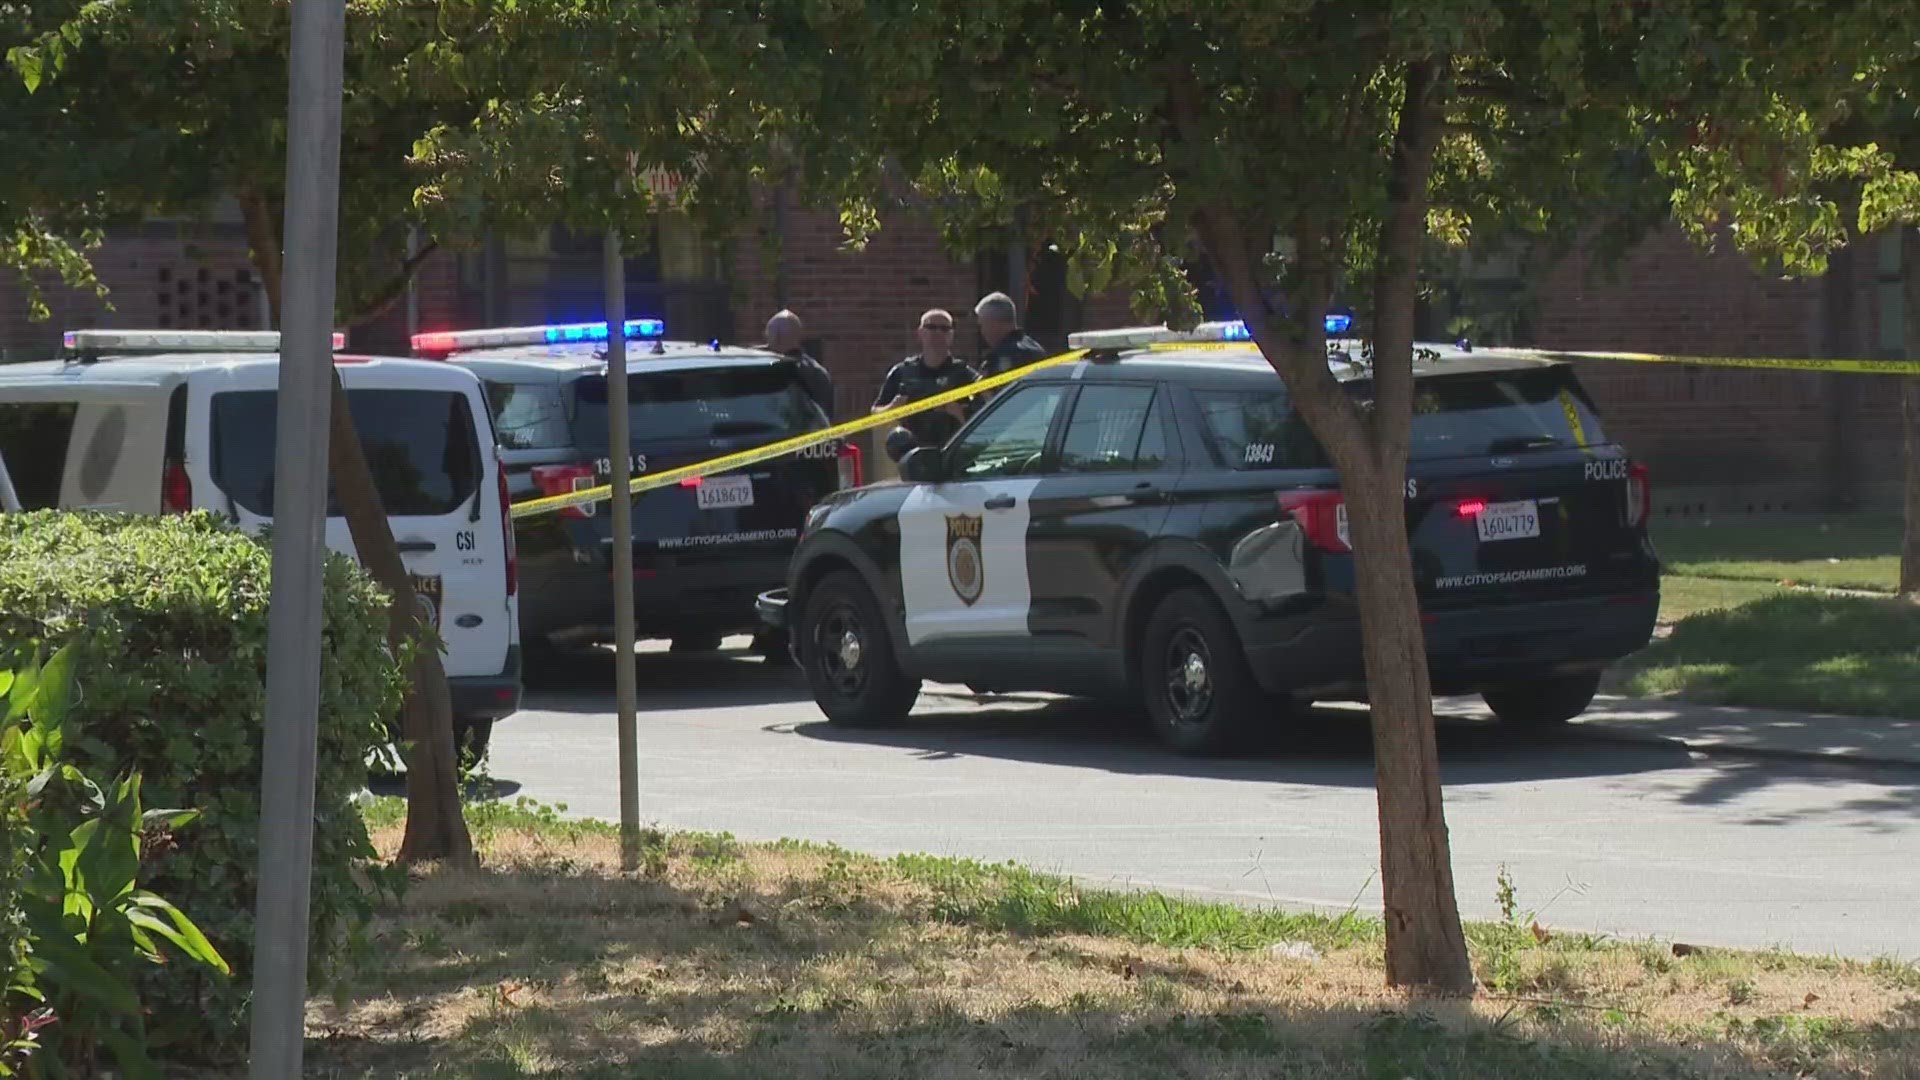 Sacramento police are investigating the second shooting in days at a north Land Park housing complex. Community members have grown concerned.